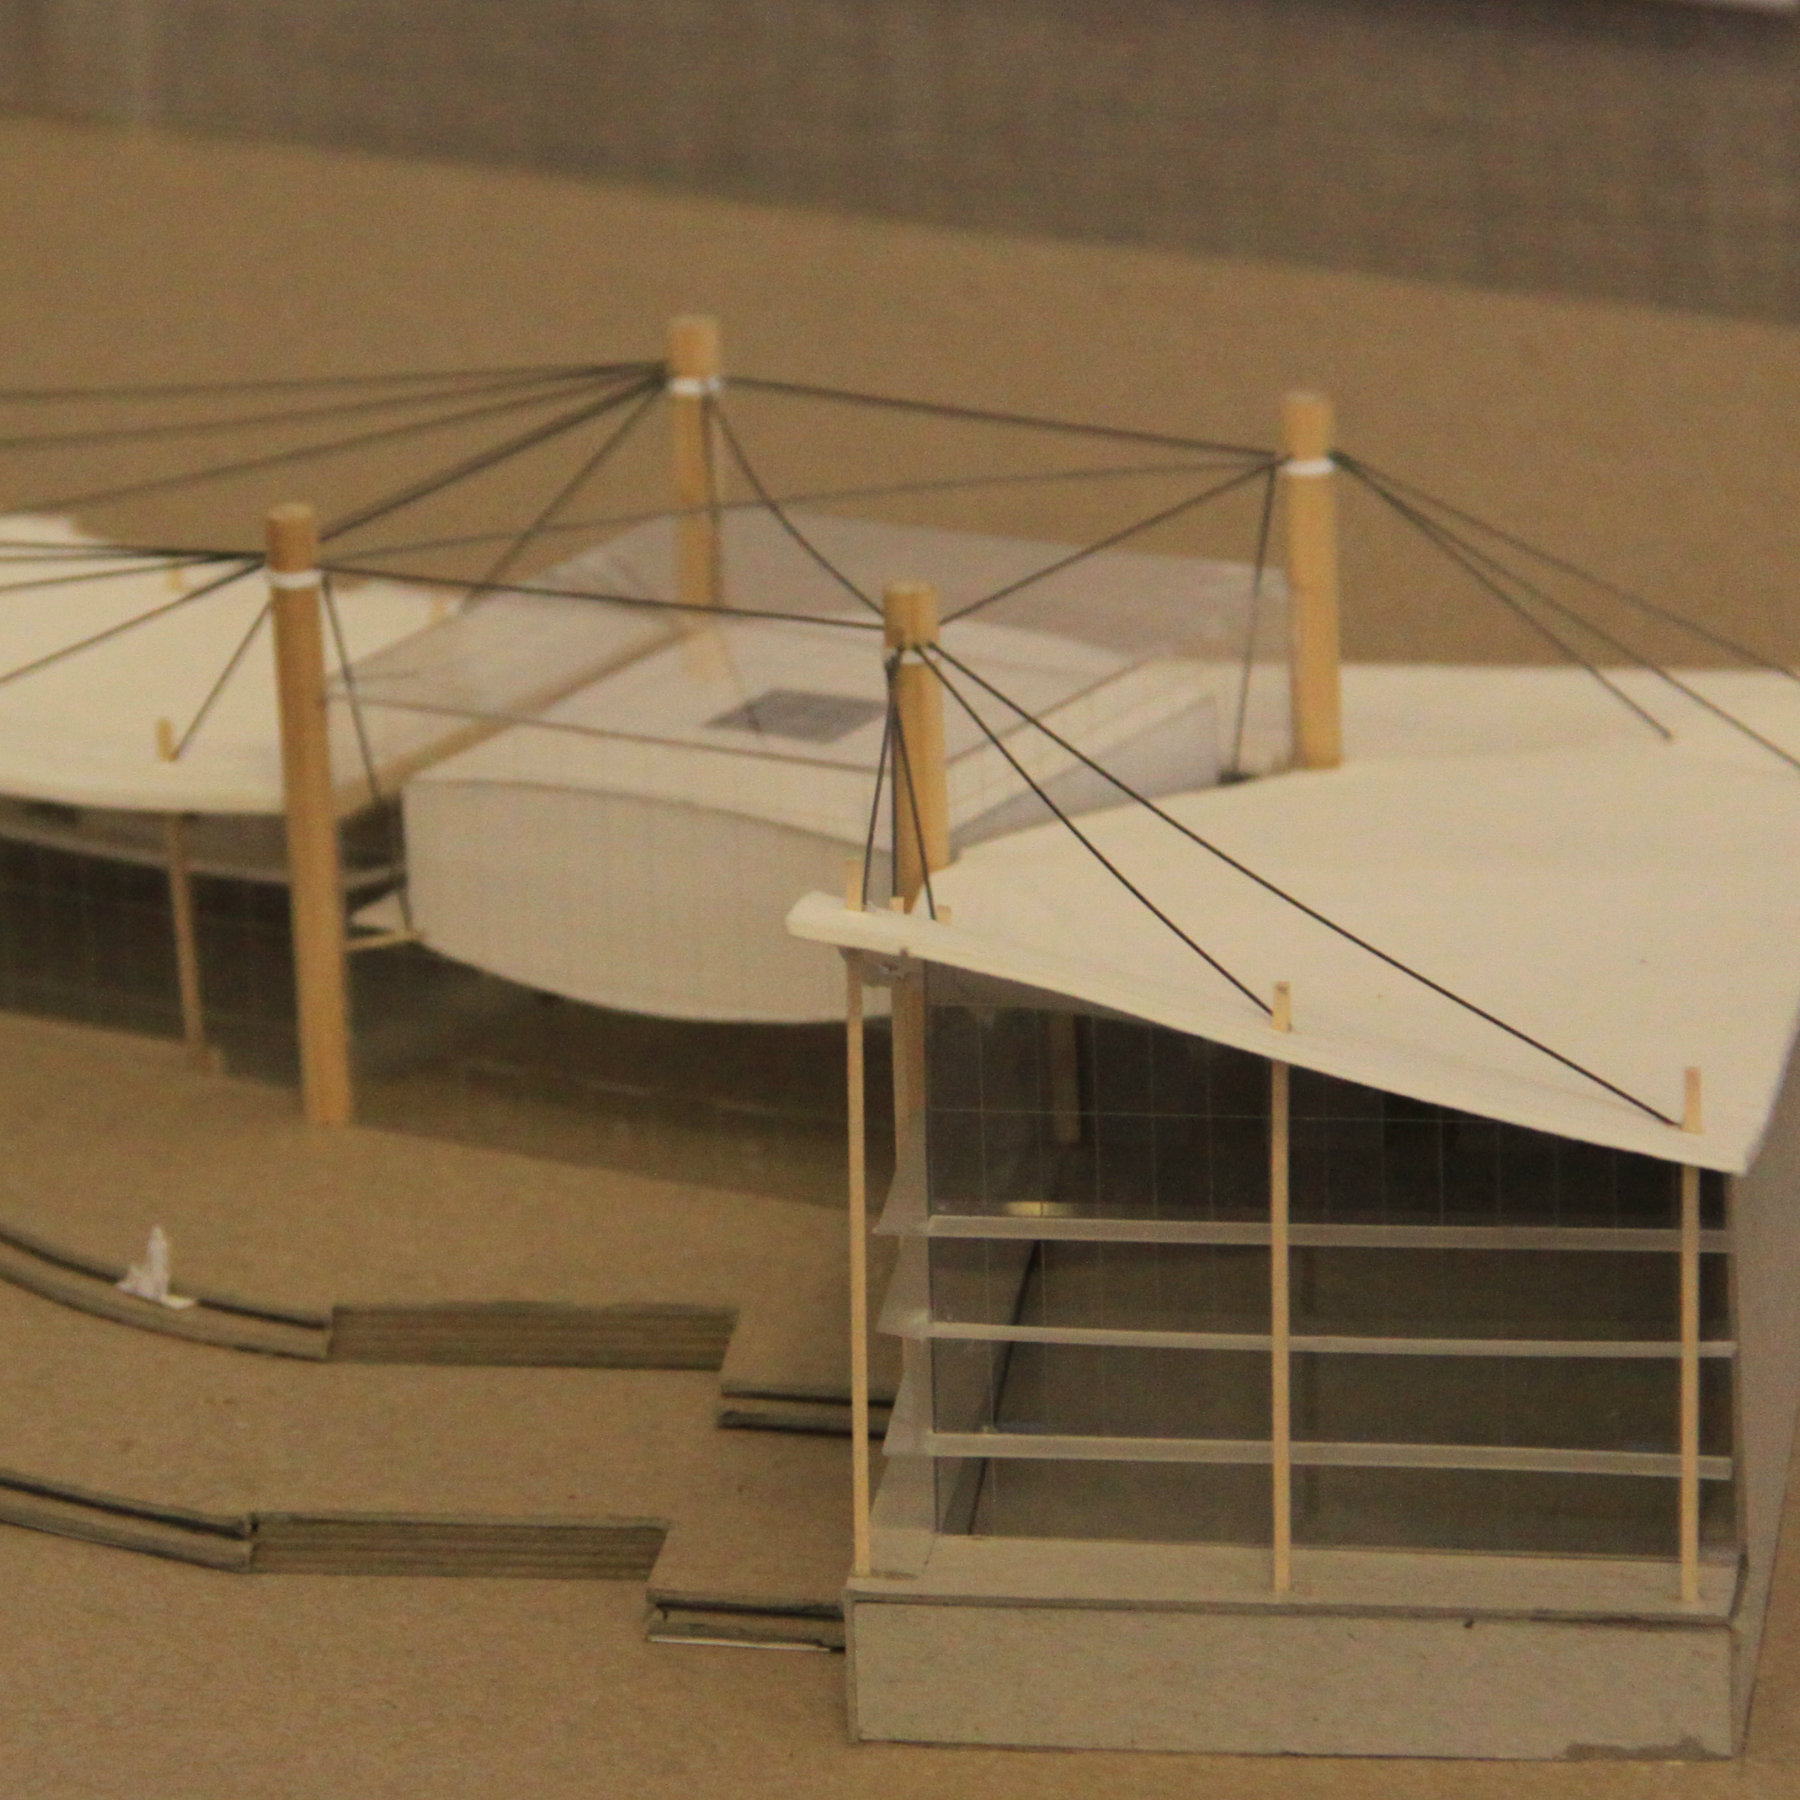 model of a building using tension wires 